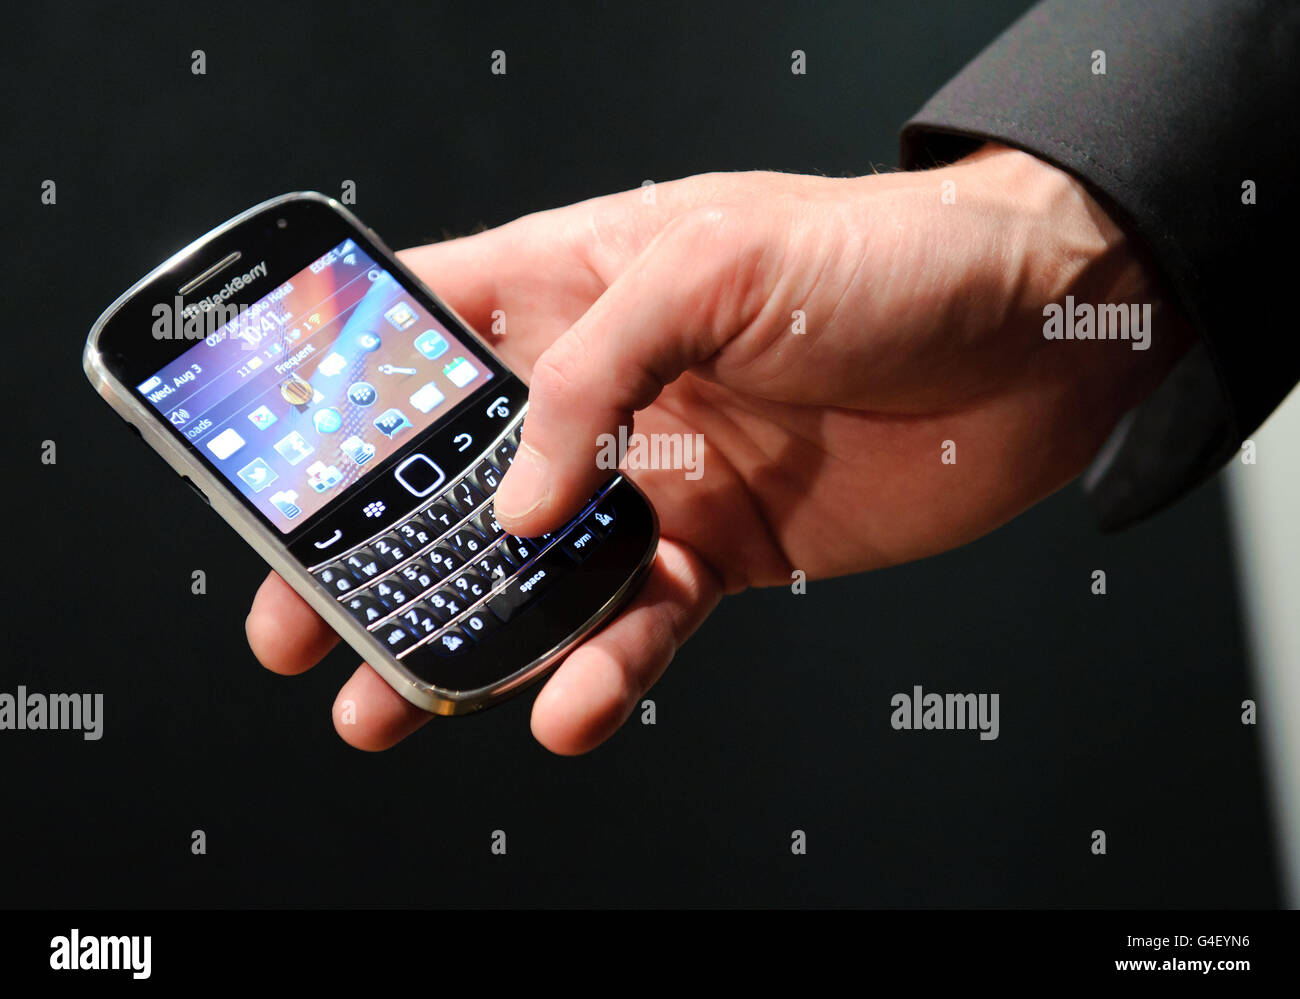 The new BlackBerry Bold 9900 at the global launch of Research In Motion's BlackBerry 7 smartphones, at the Soho Hotel in London. Stock Photo